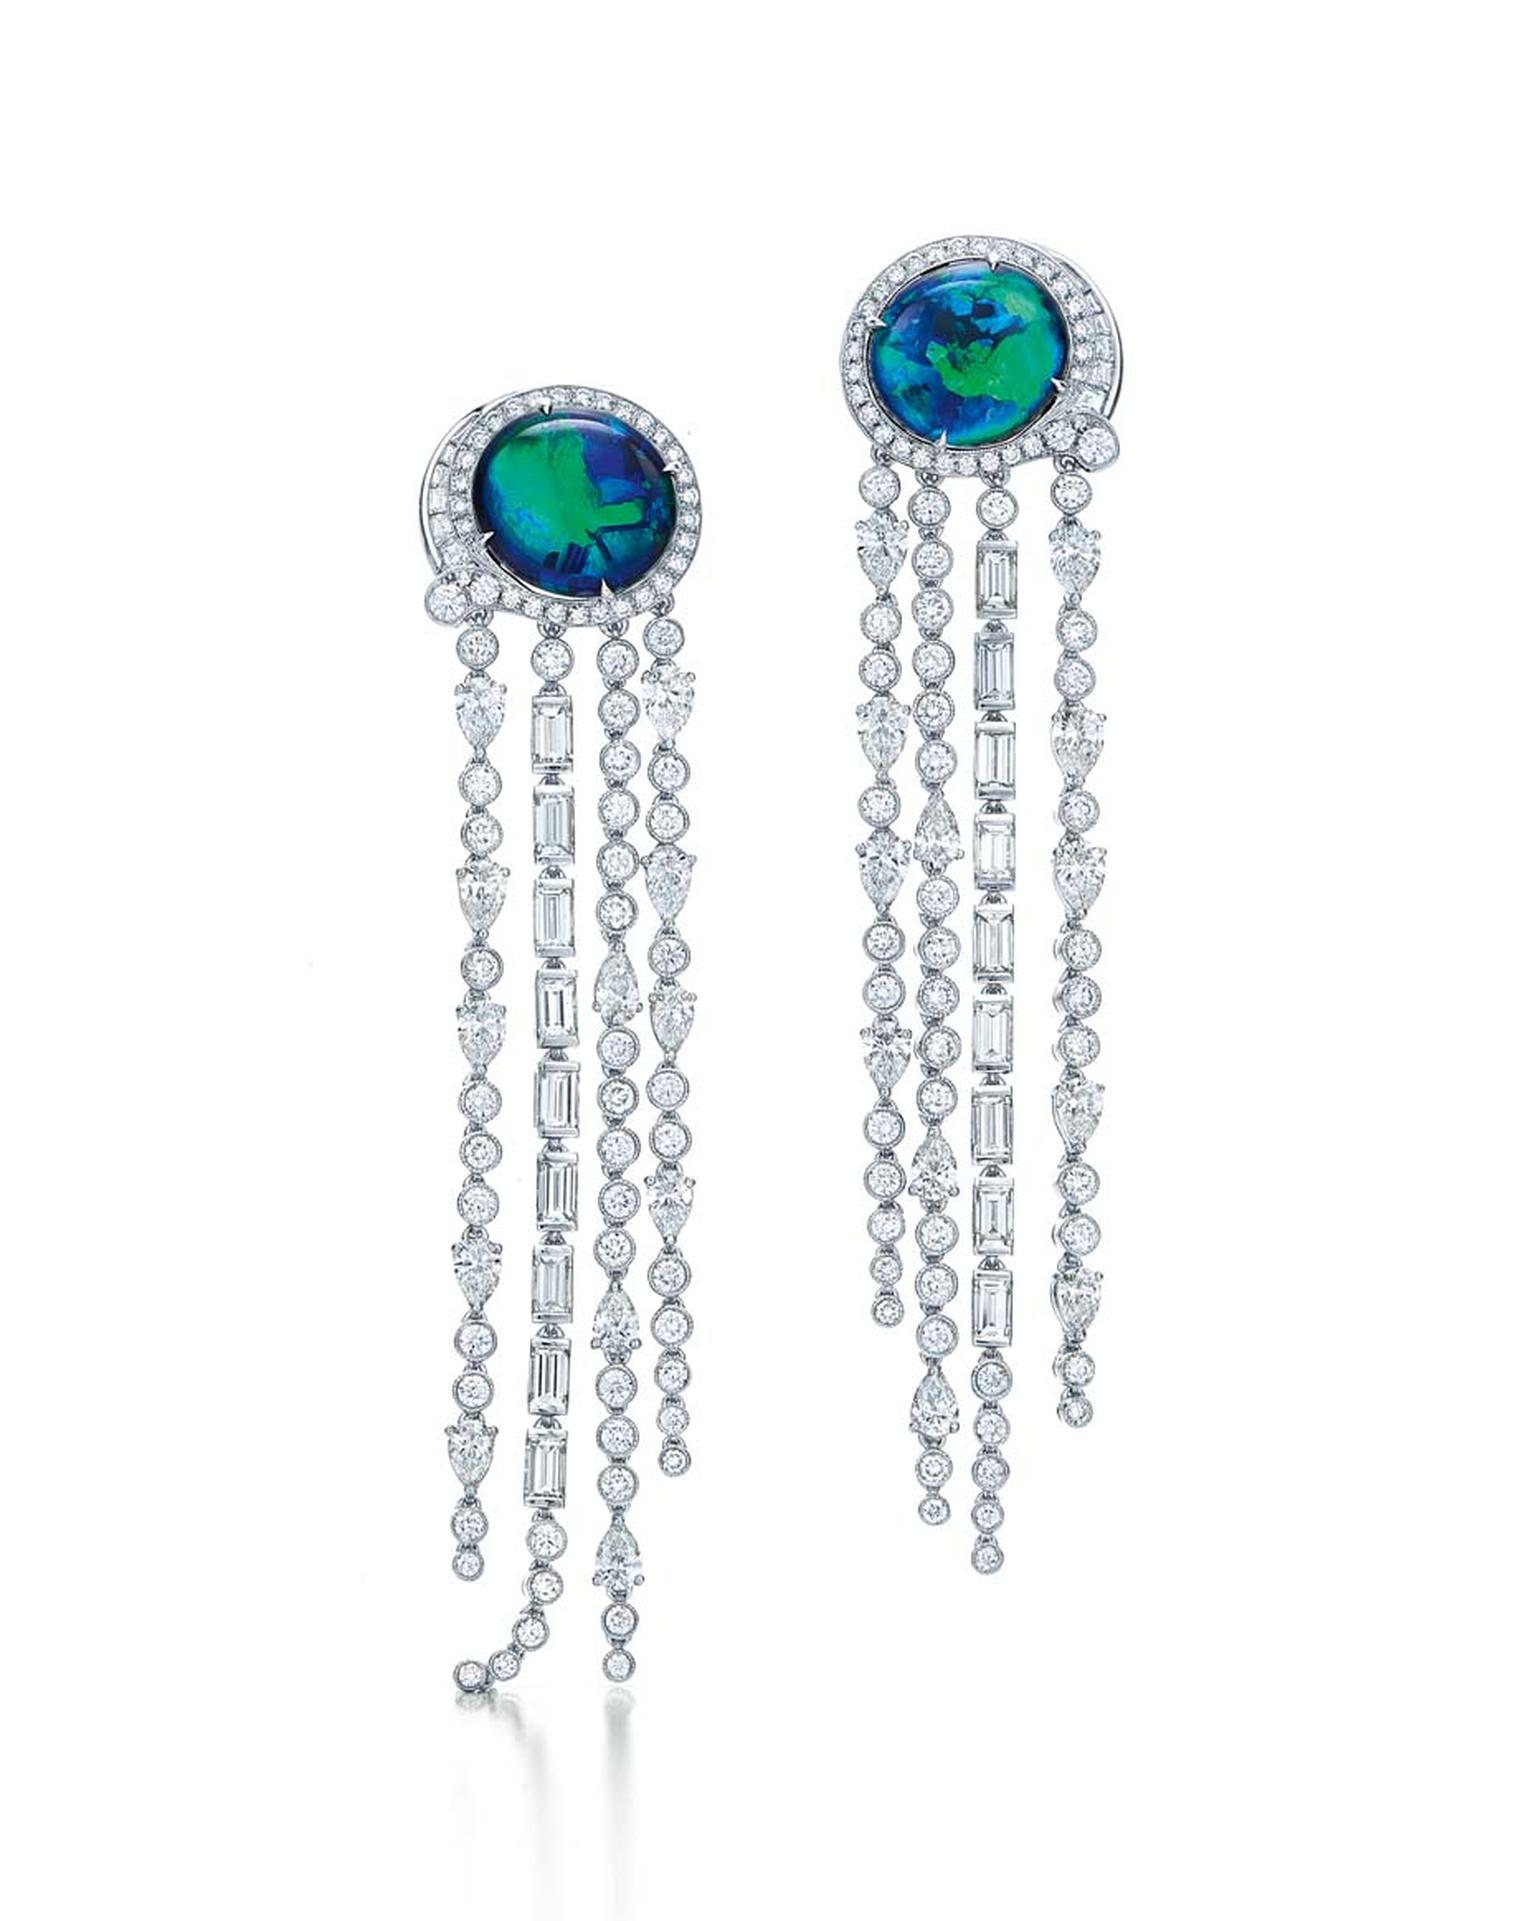 Tiffany earrings from the 2015 Blue Book collection set with 8.87ct black opals and mixed-cut diamonds in platinum.